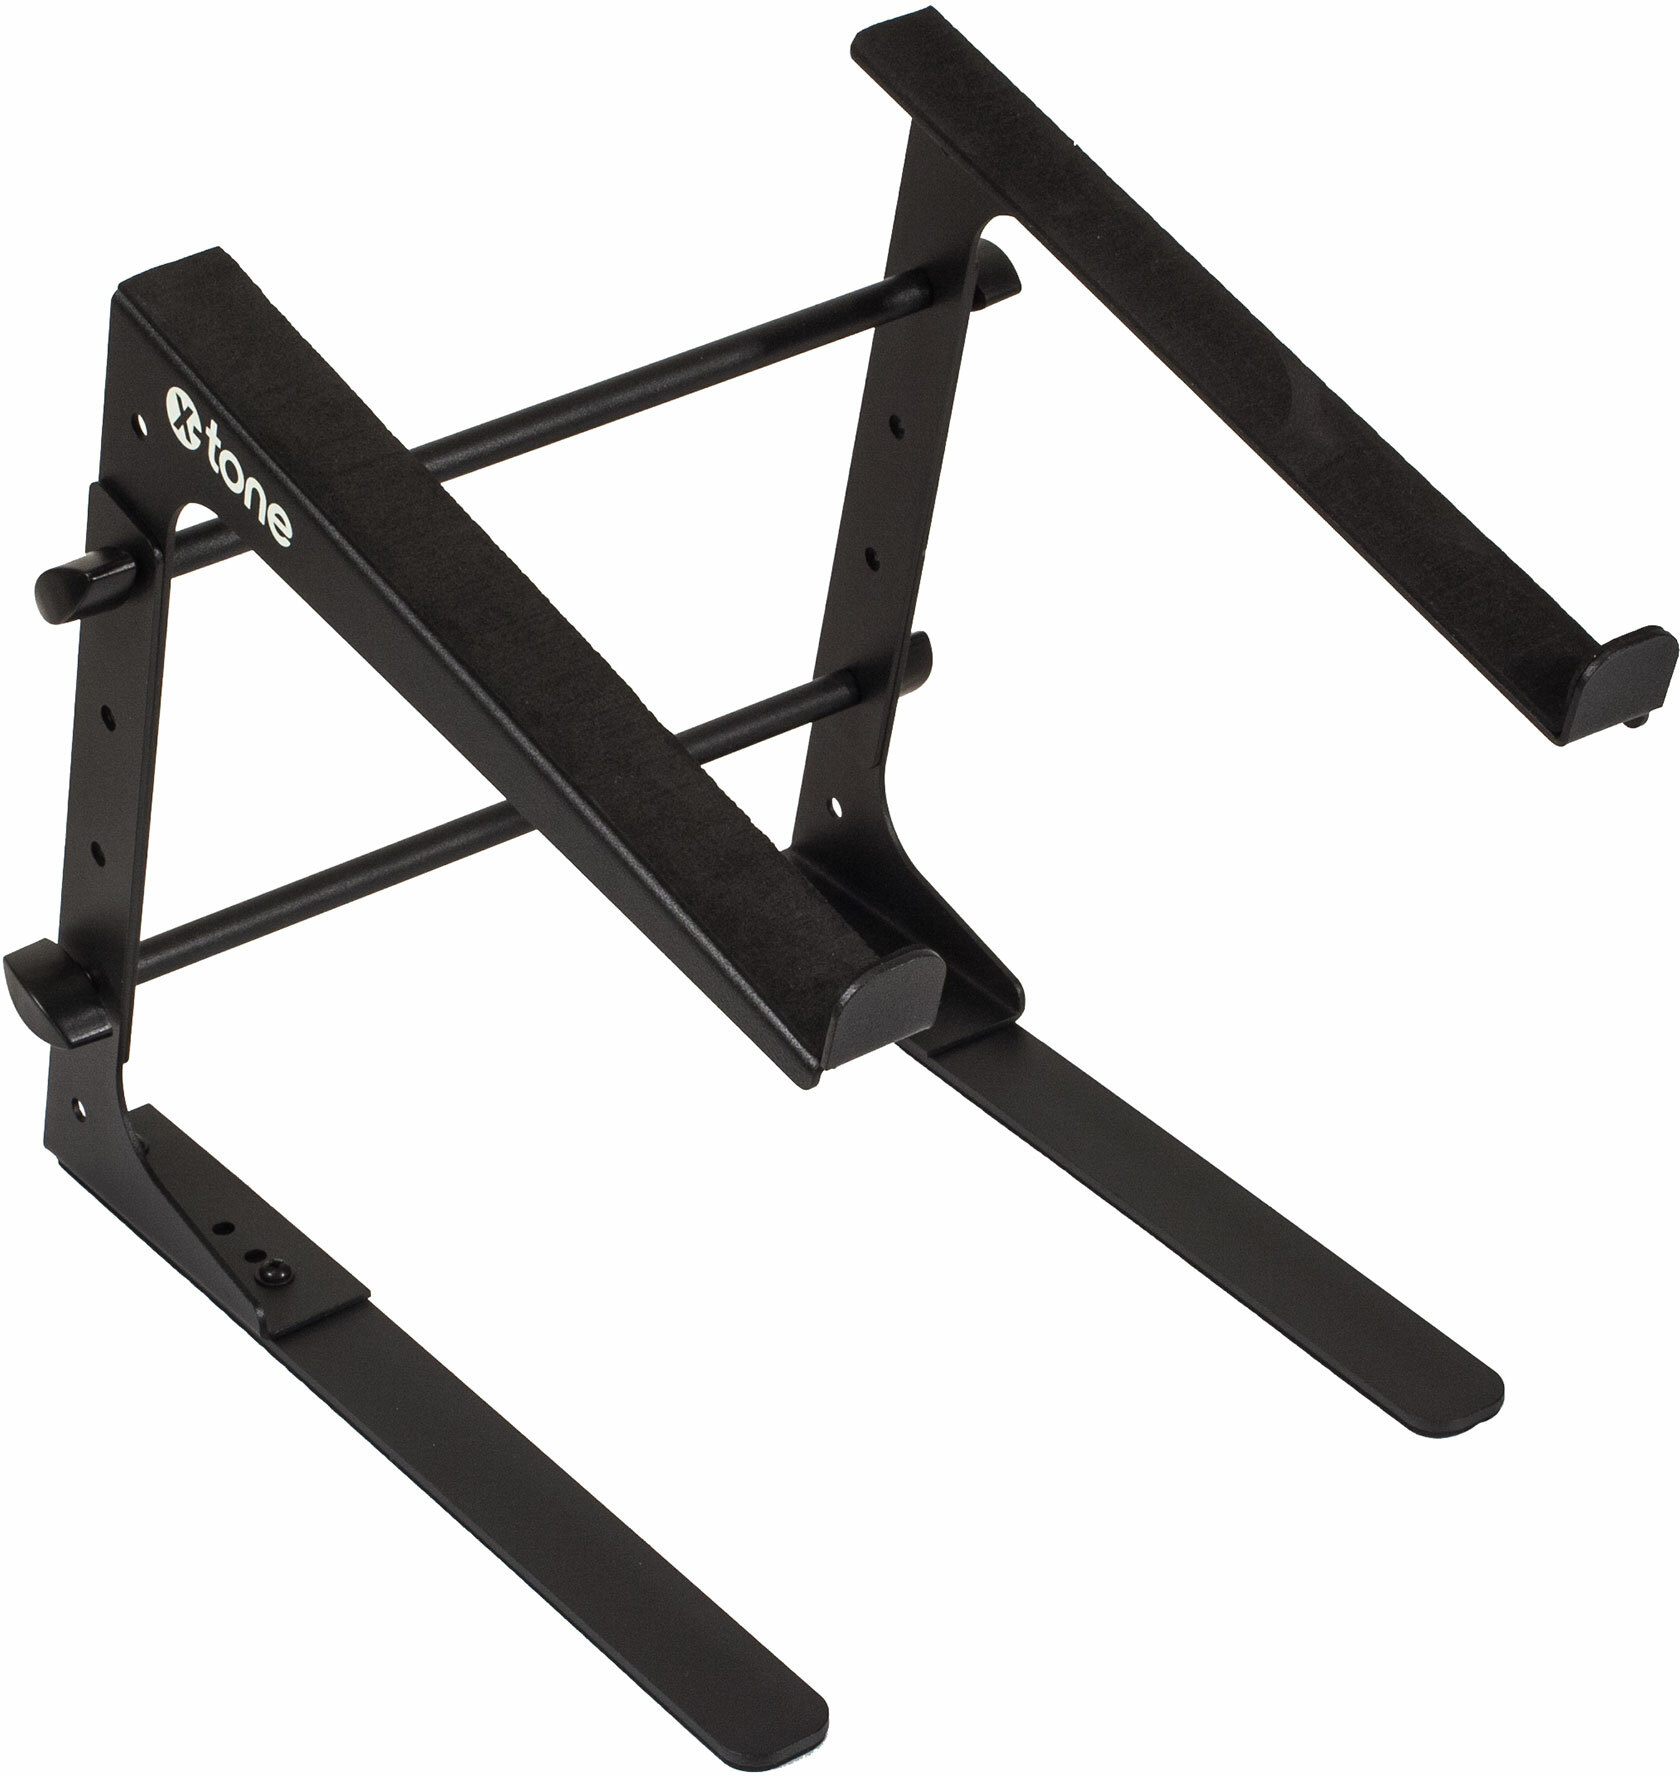 X-tone Xh 6400 Support Dj - Stand & Support Dj - Main picture